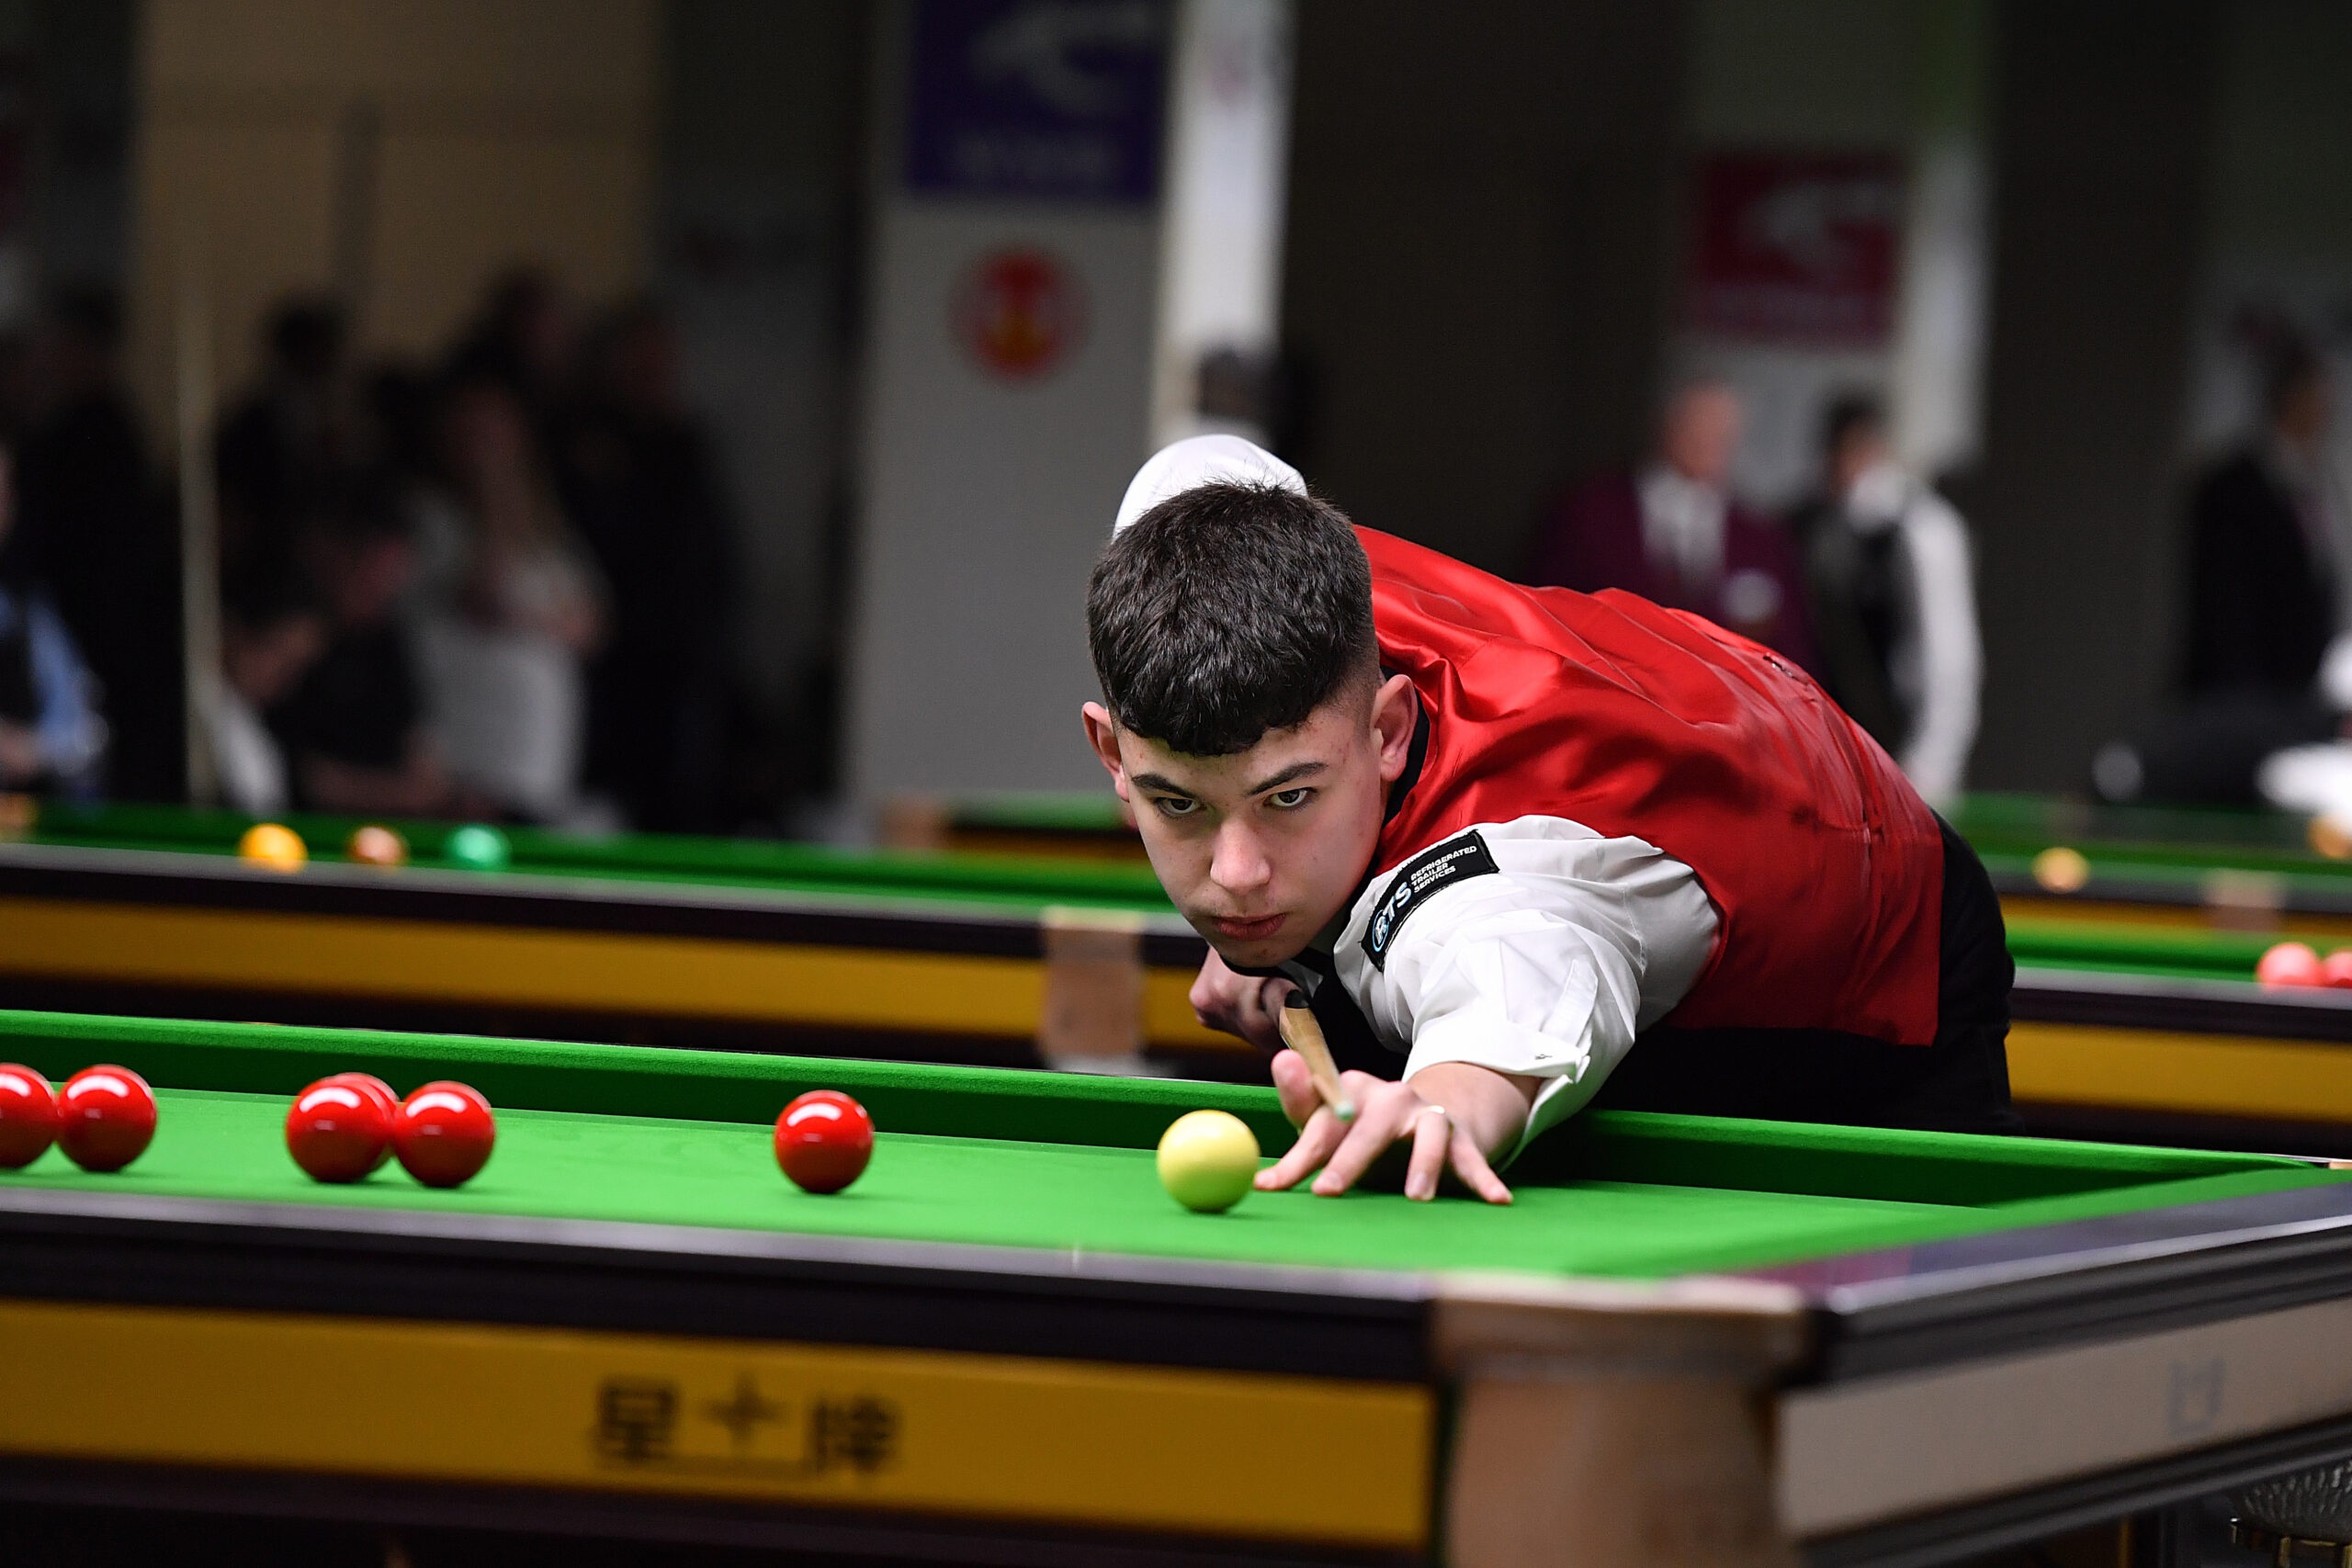 2023 Snooker World Championship preview: Top players, full schedule and how  to watch live